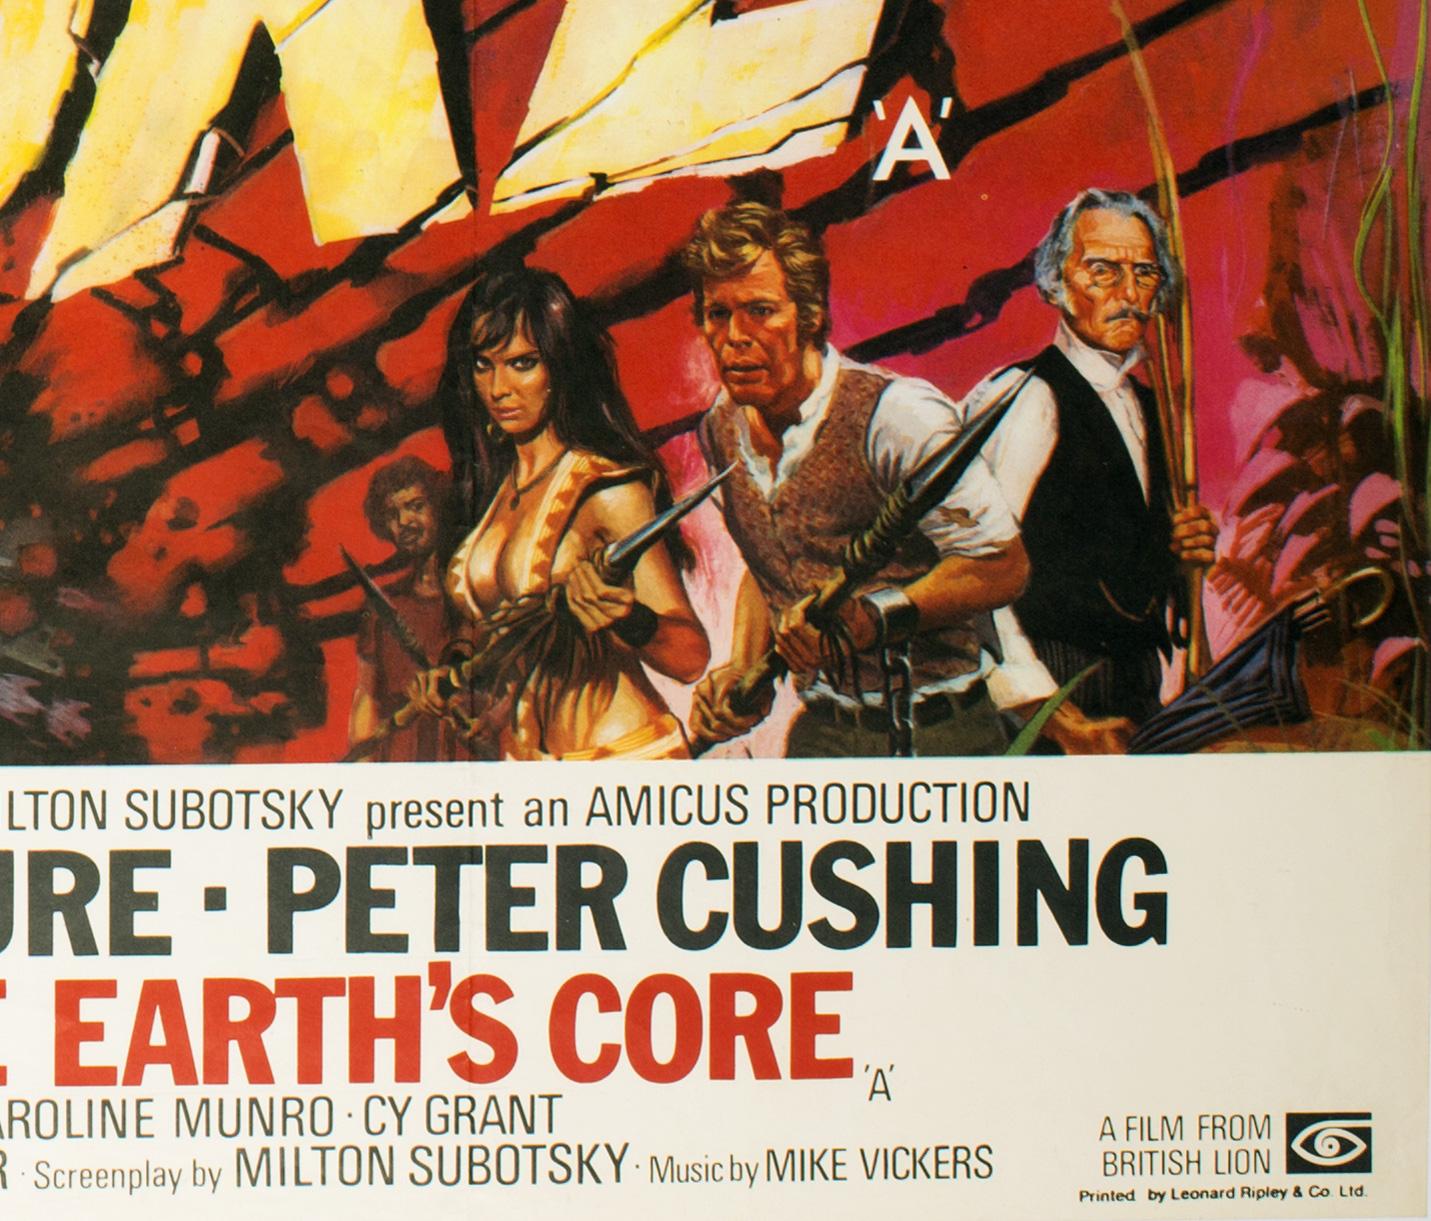 Some more superb Chantrell artwork features on the Amicus and AIP co-produced vintage classic movie based on Edgar Rice Burroughs' At The Earth's Core. 

Film poster in fantastic, unrestored condition. Really strong colors.

Near mint/mint